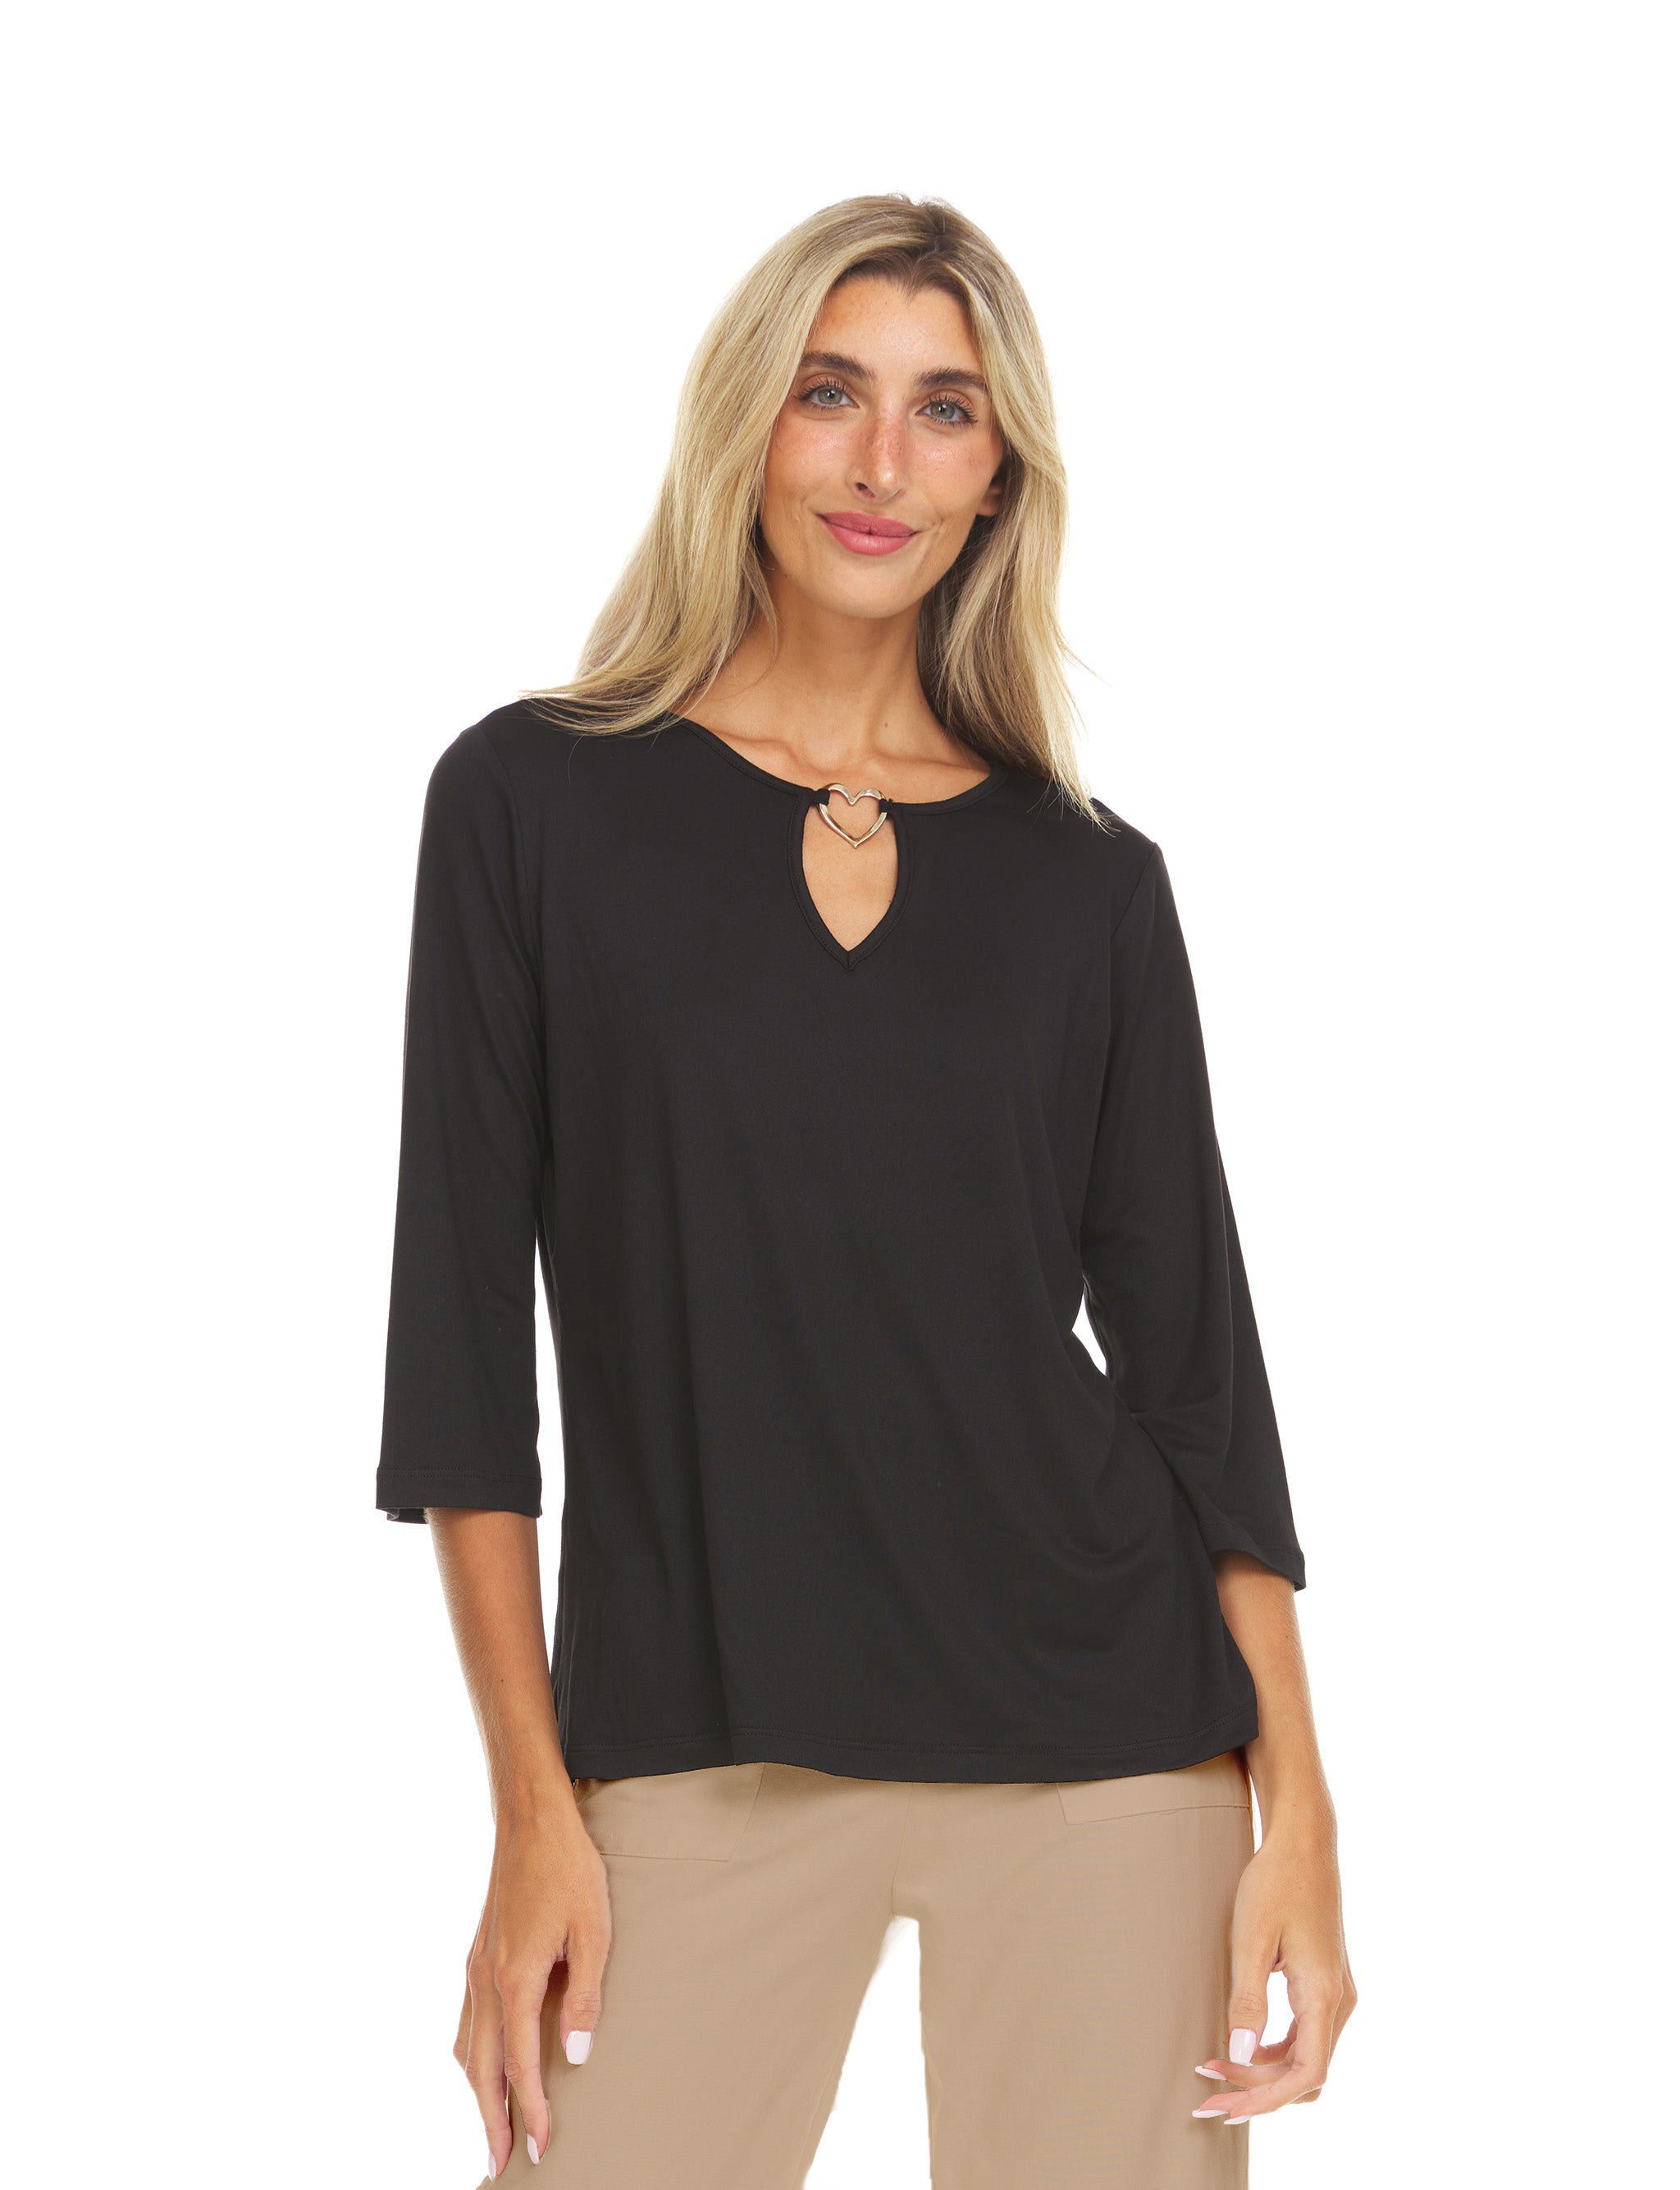 3/4 Sleeve Tunic With Metal Heart Design Detail At Keyhole Neckline